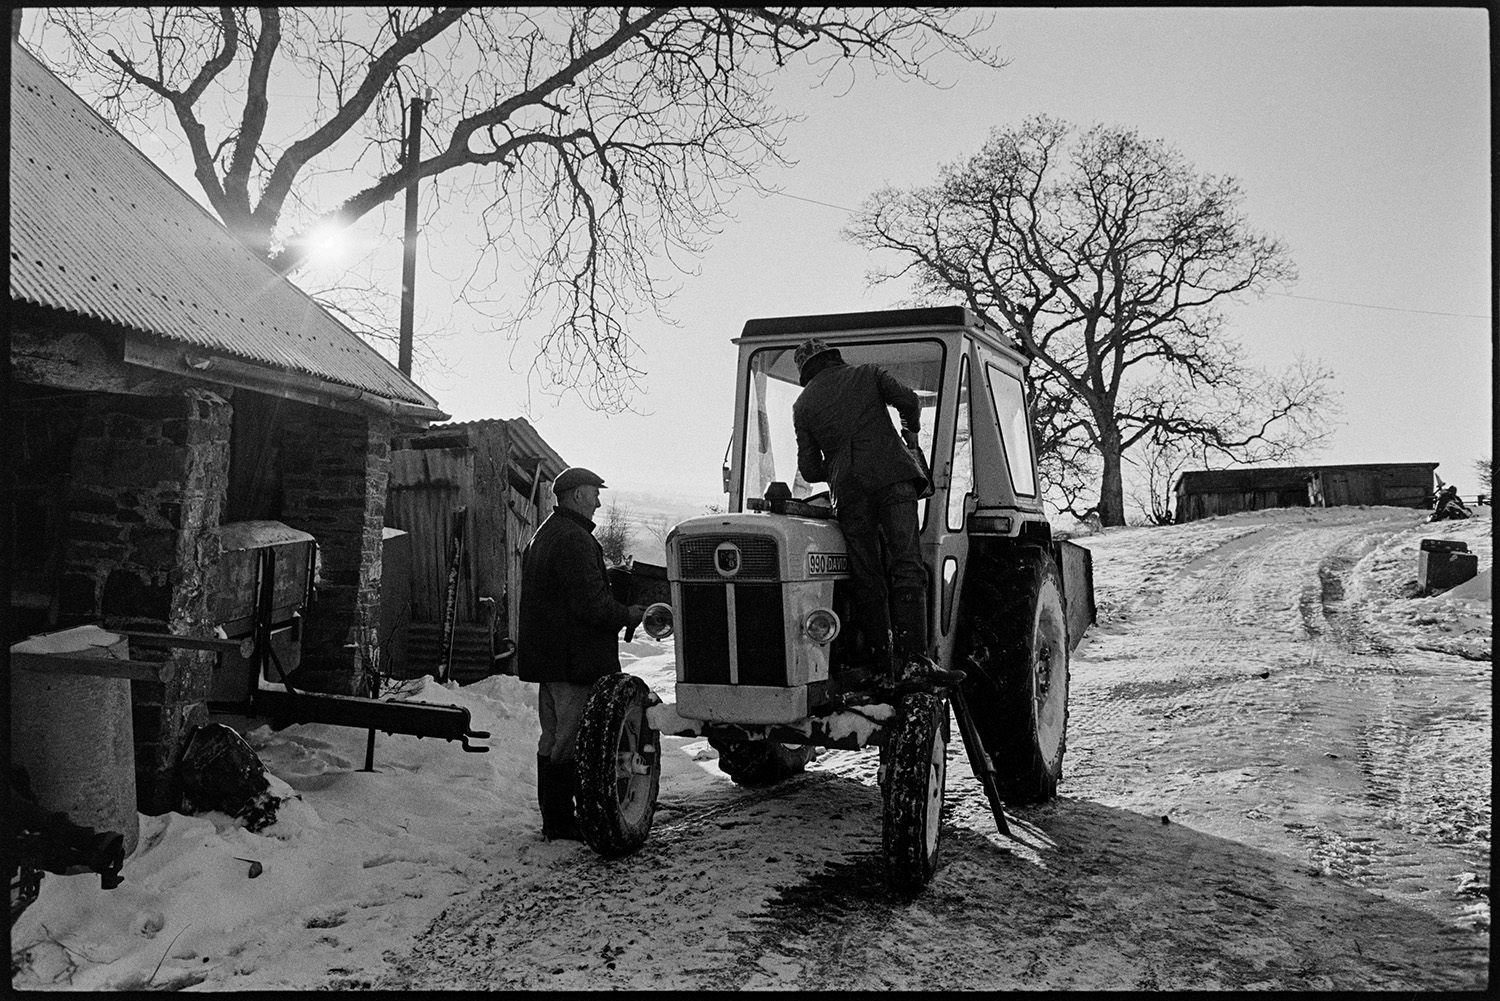 Snow, farmer trying to unfreeze tractor. 
[Two men trying to unfreeze a tractor in the snowy farmyard at Parsonage, Iddesleigh. Barns are visible in the background.]